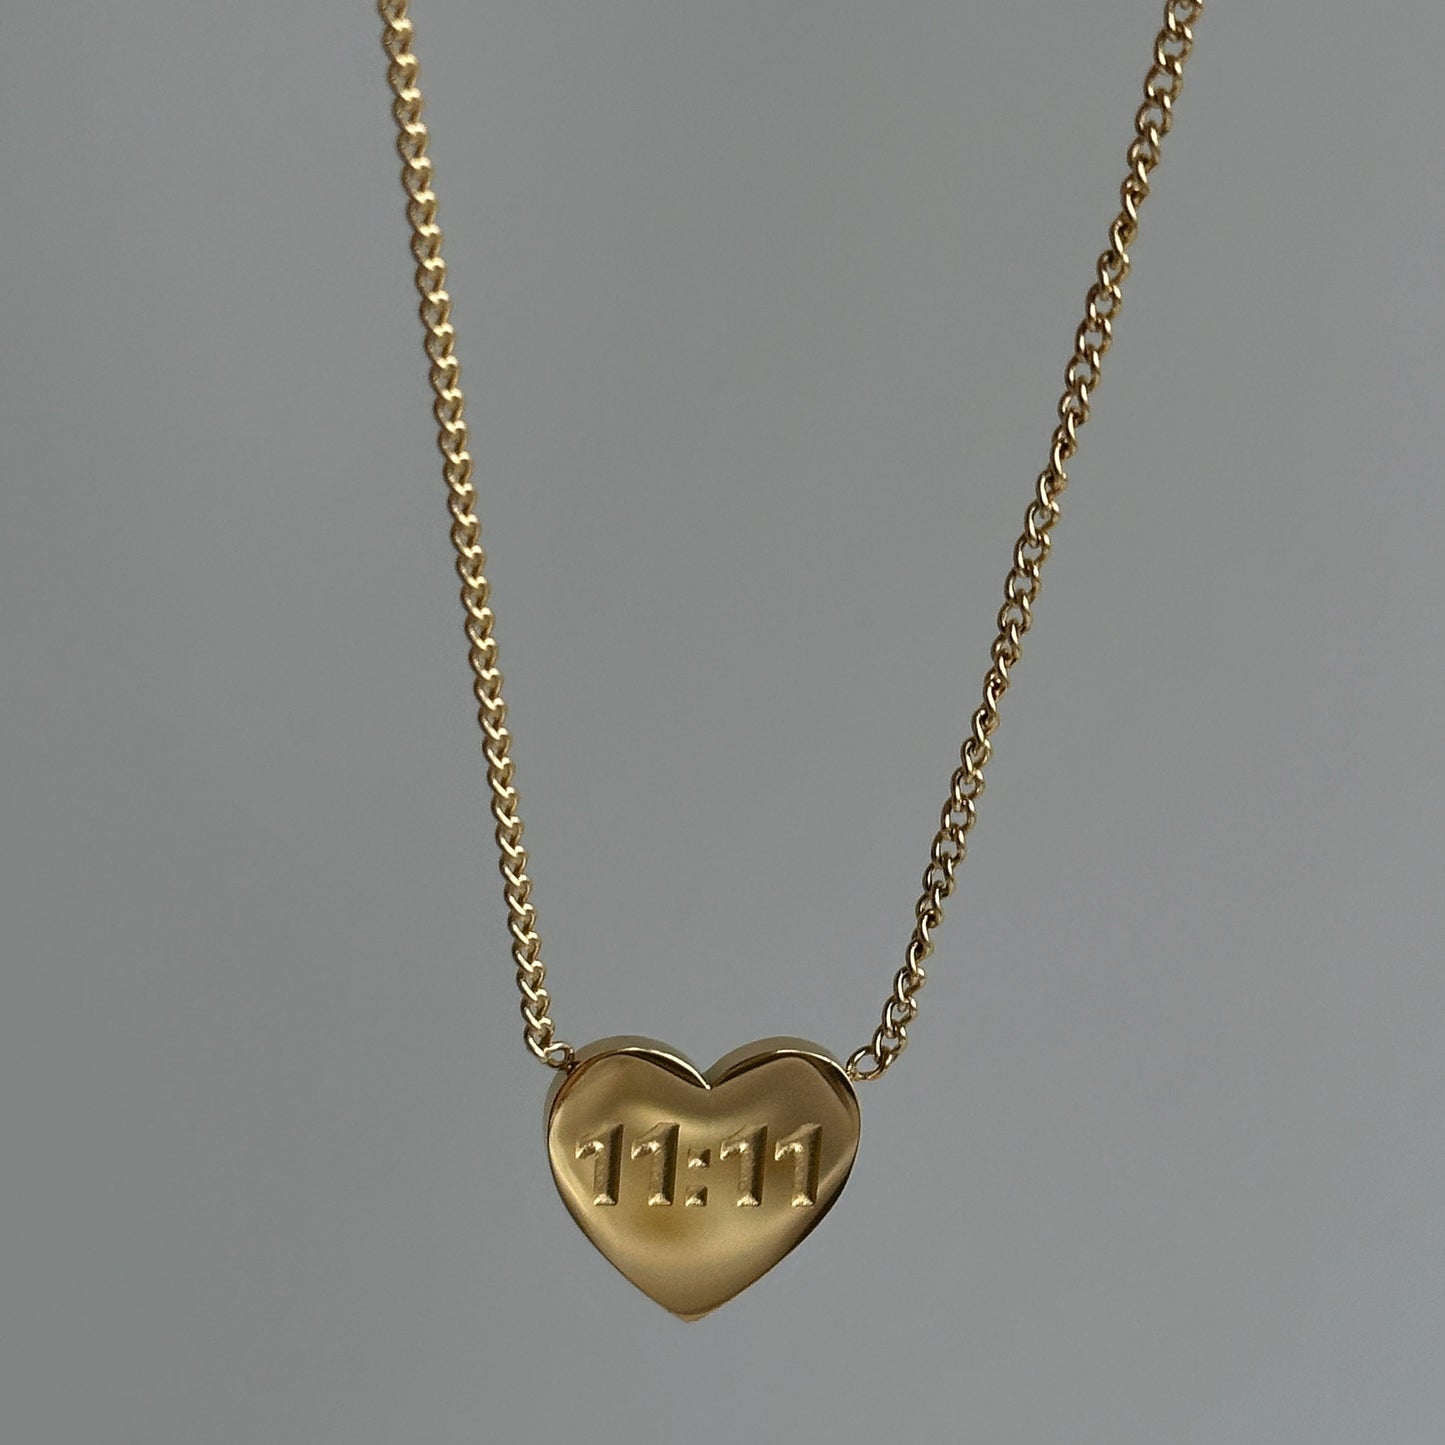 11:11 Heart Necklace